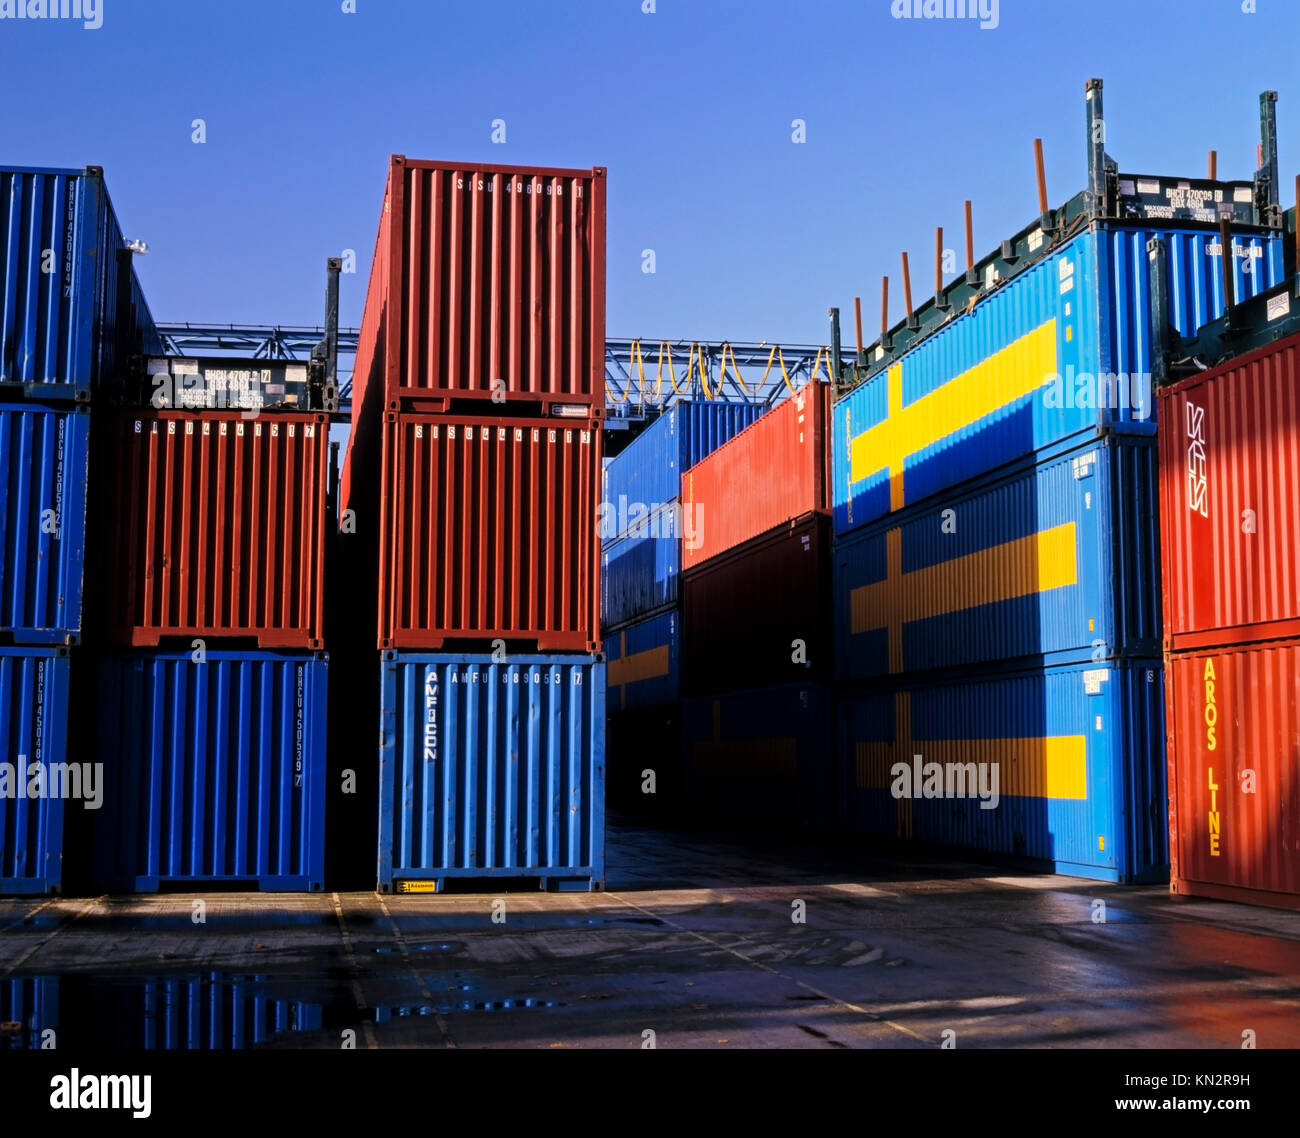 Swedish containers stacked at a container terminal and docks, Sweden imports and exports. Stock Photo